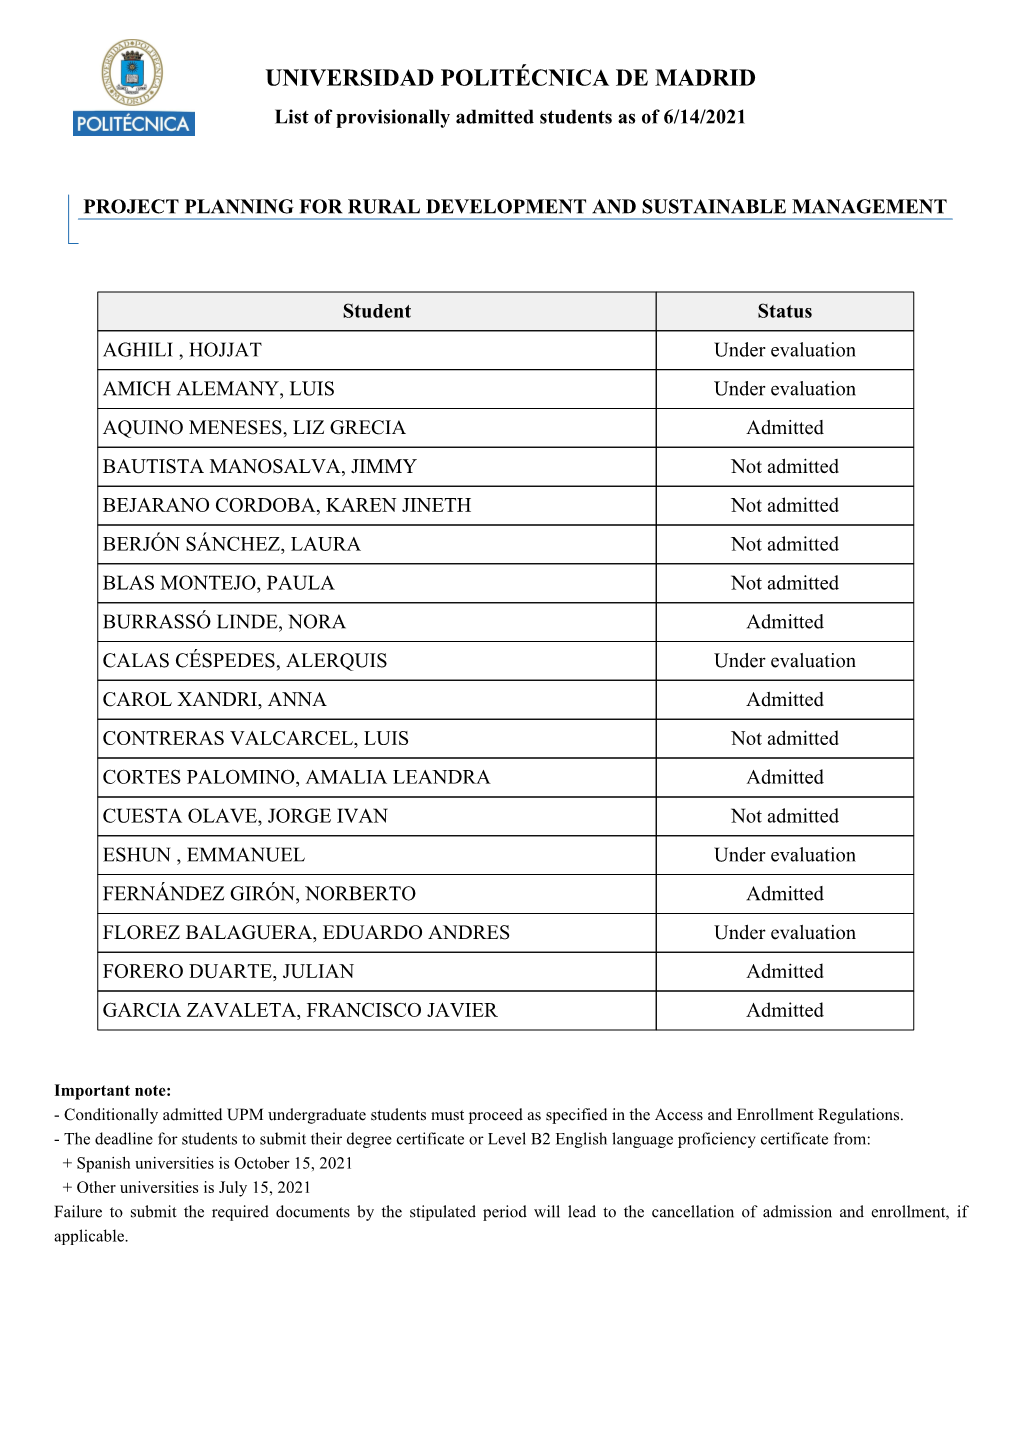 UNIVERSIDAD POLITÉCNICA DE MADRID List of Provisionally Admitted Students As of 6/14/2021